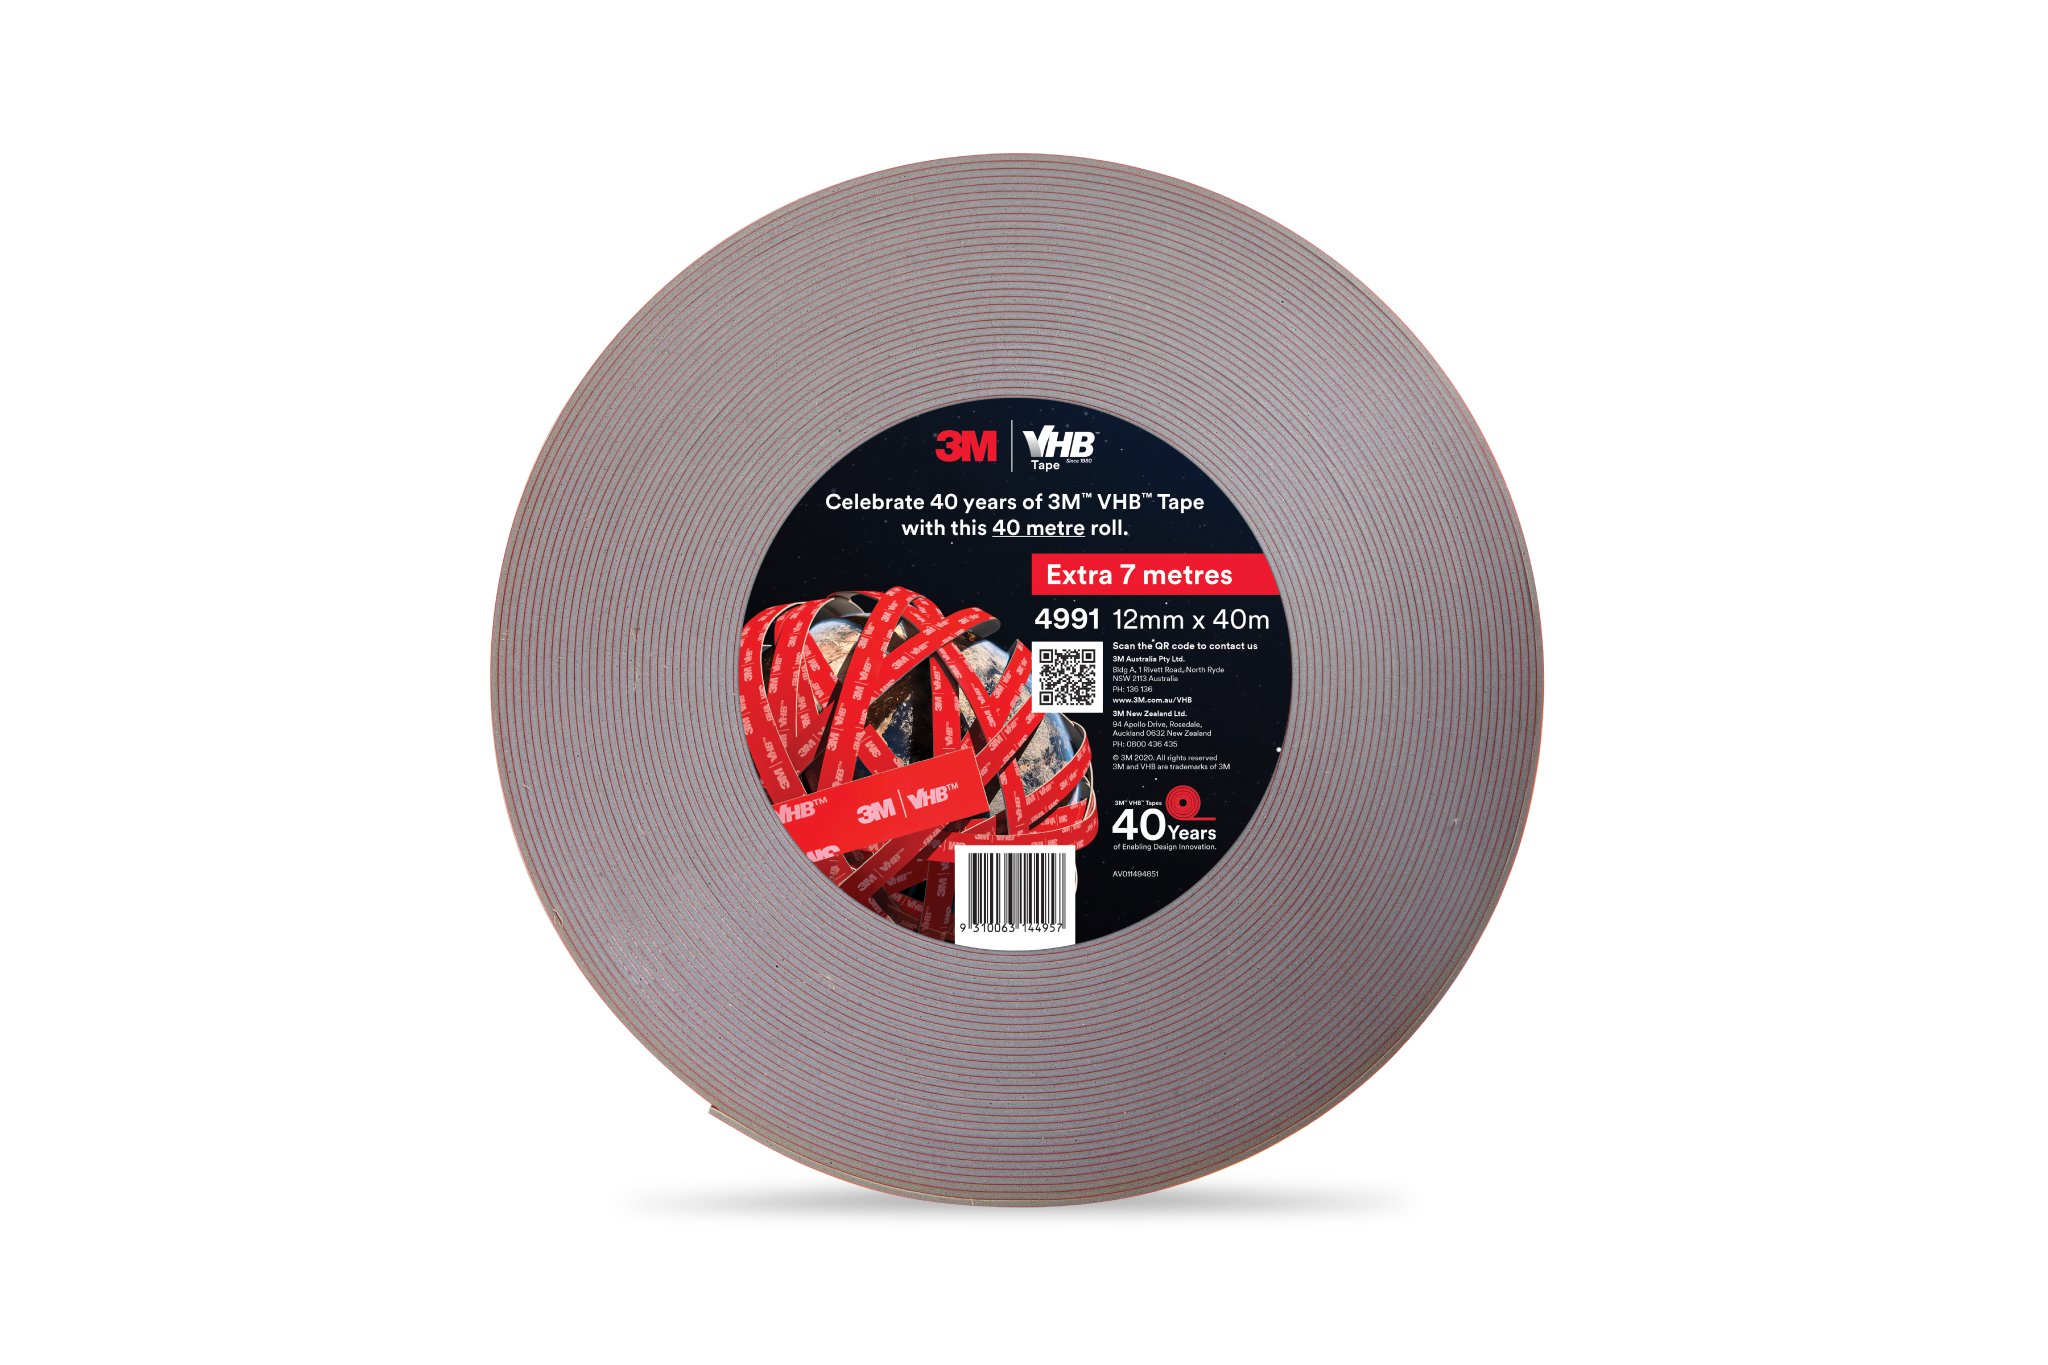 Extended Promotion! Celebrate 40 Years of 3M VHB Tape with ATA. 7m Free!